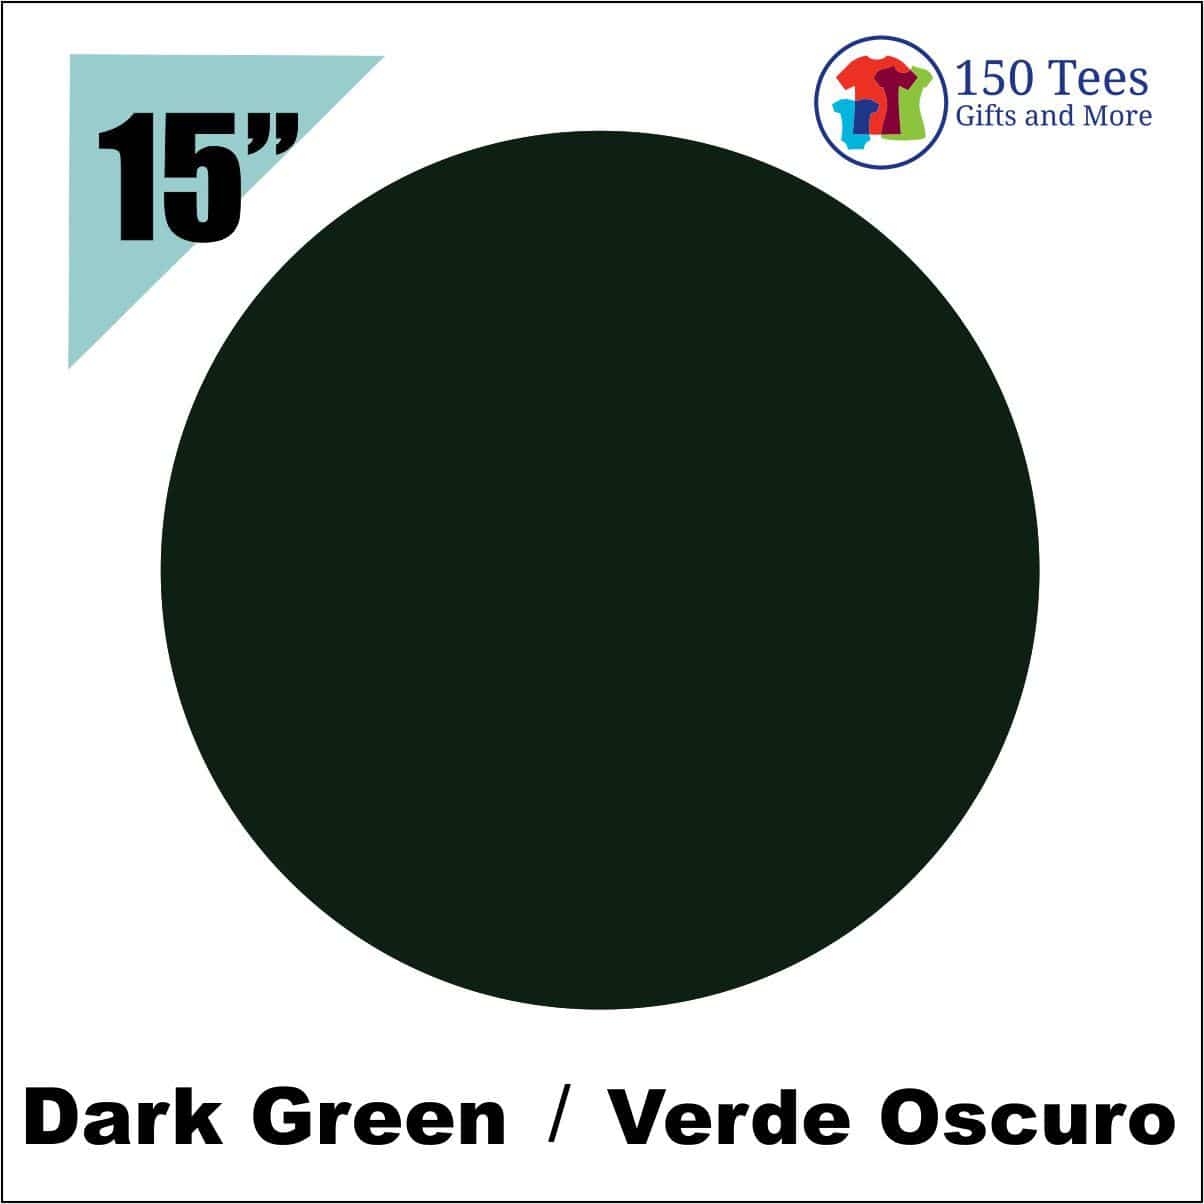 EasyWeed HTV 15" - Dark Green - 150 TEES GIFTS & MORE